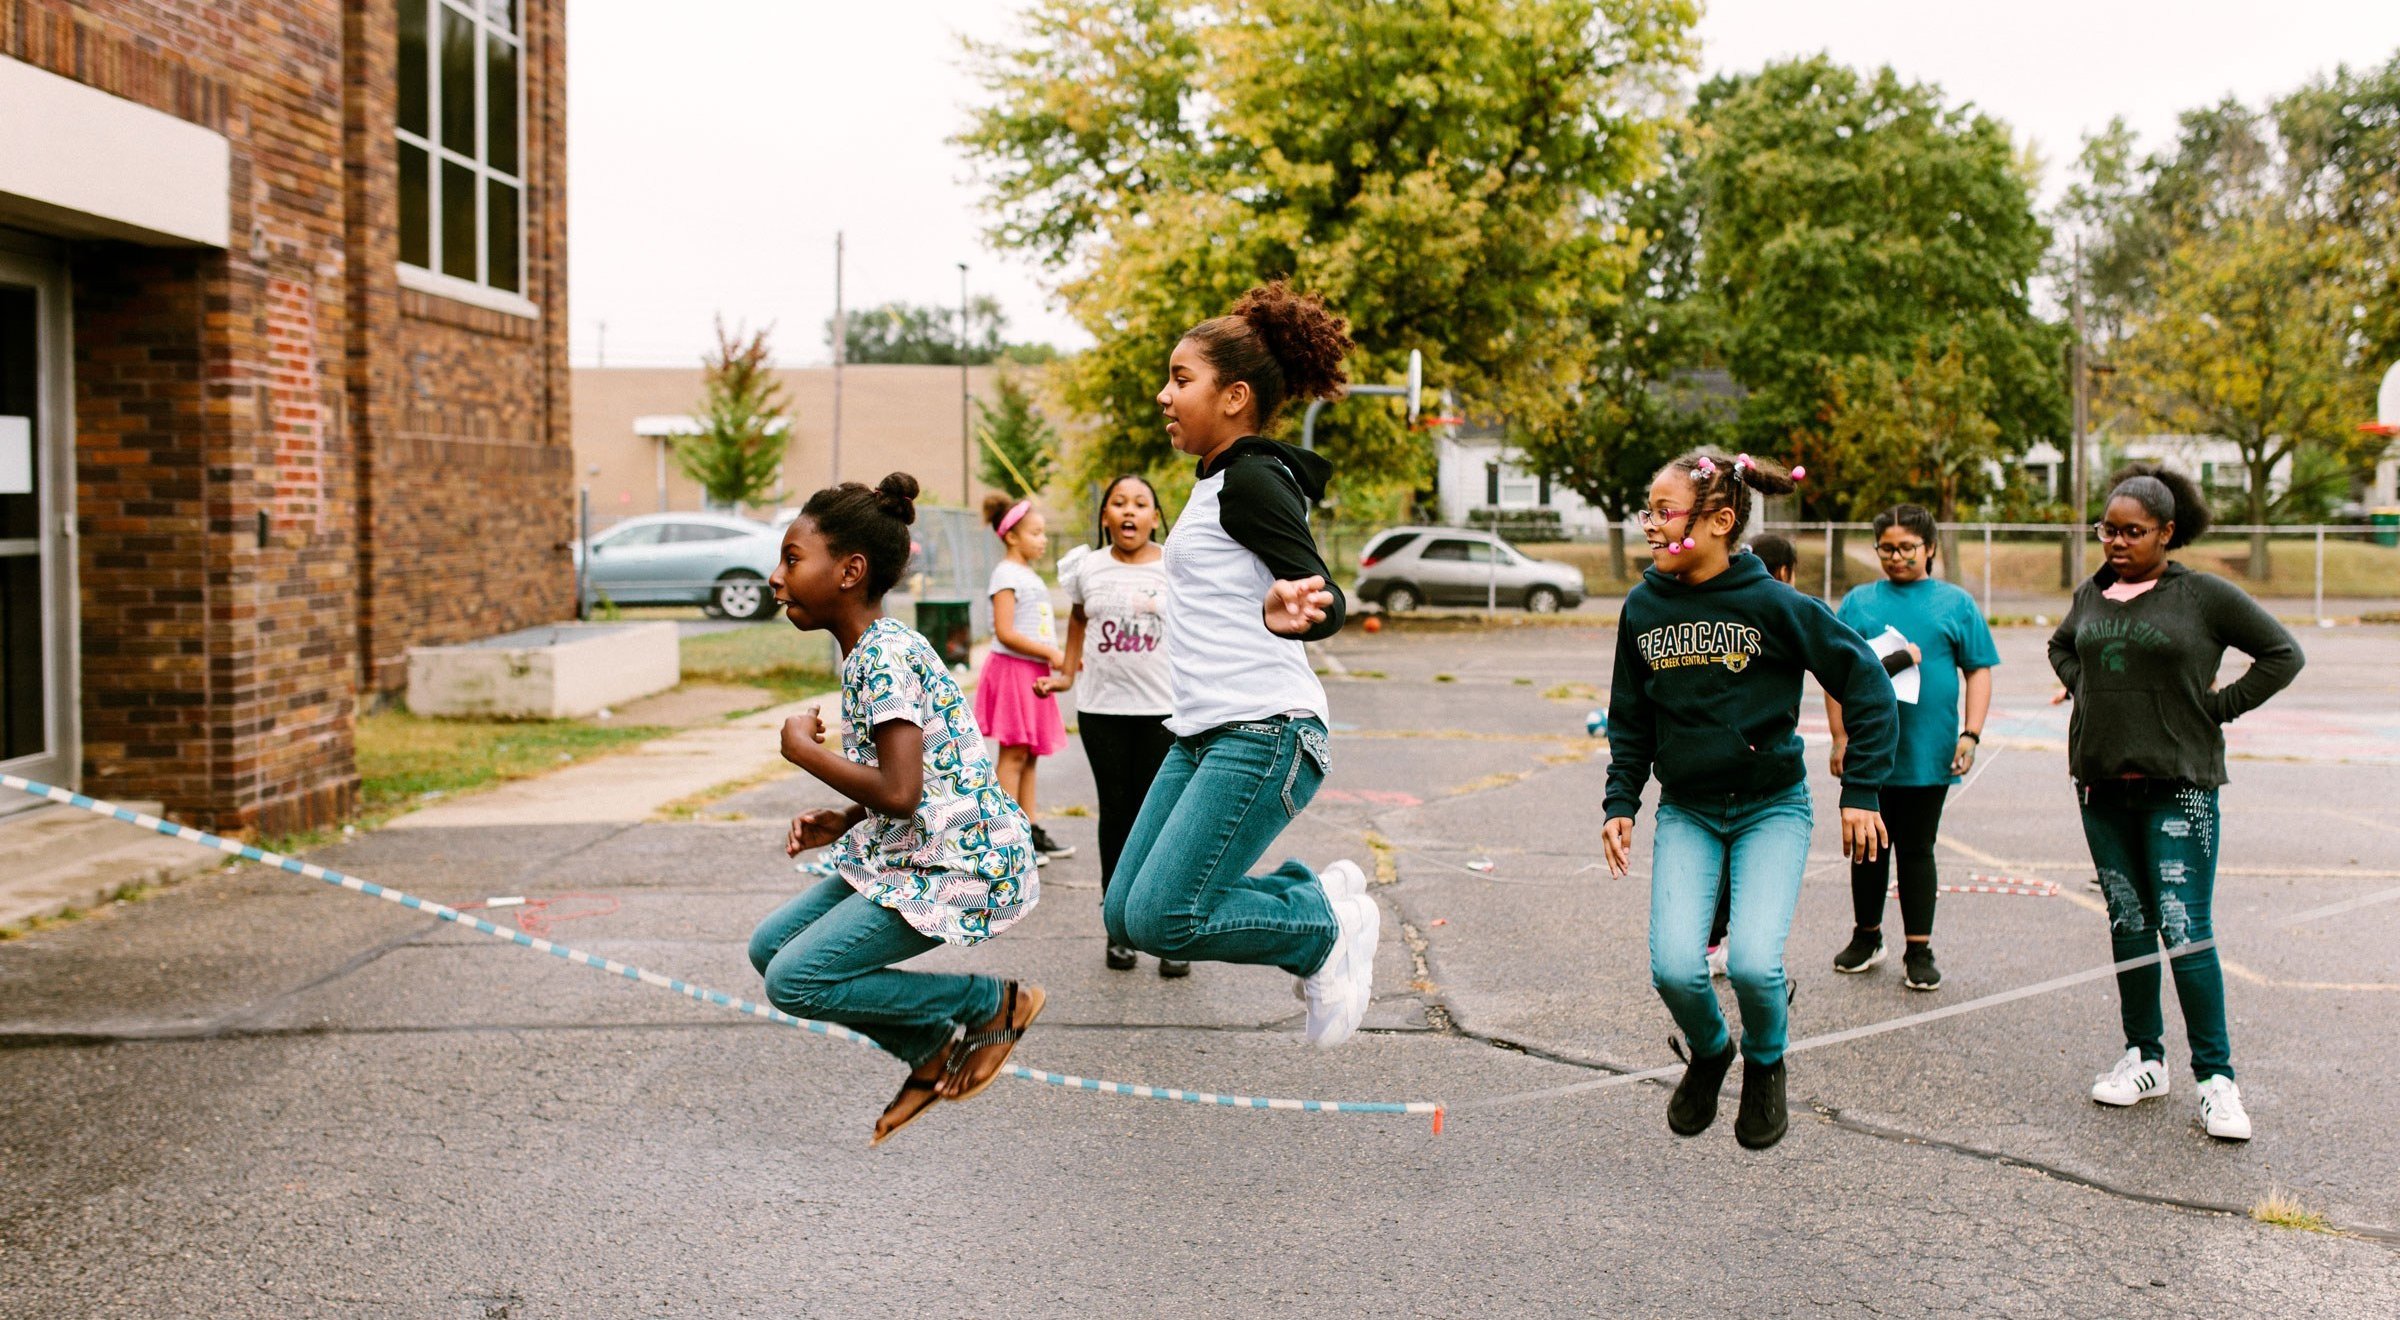 Three students jump rope in the yard while others cheer them on.